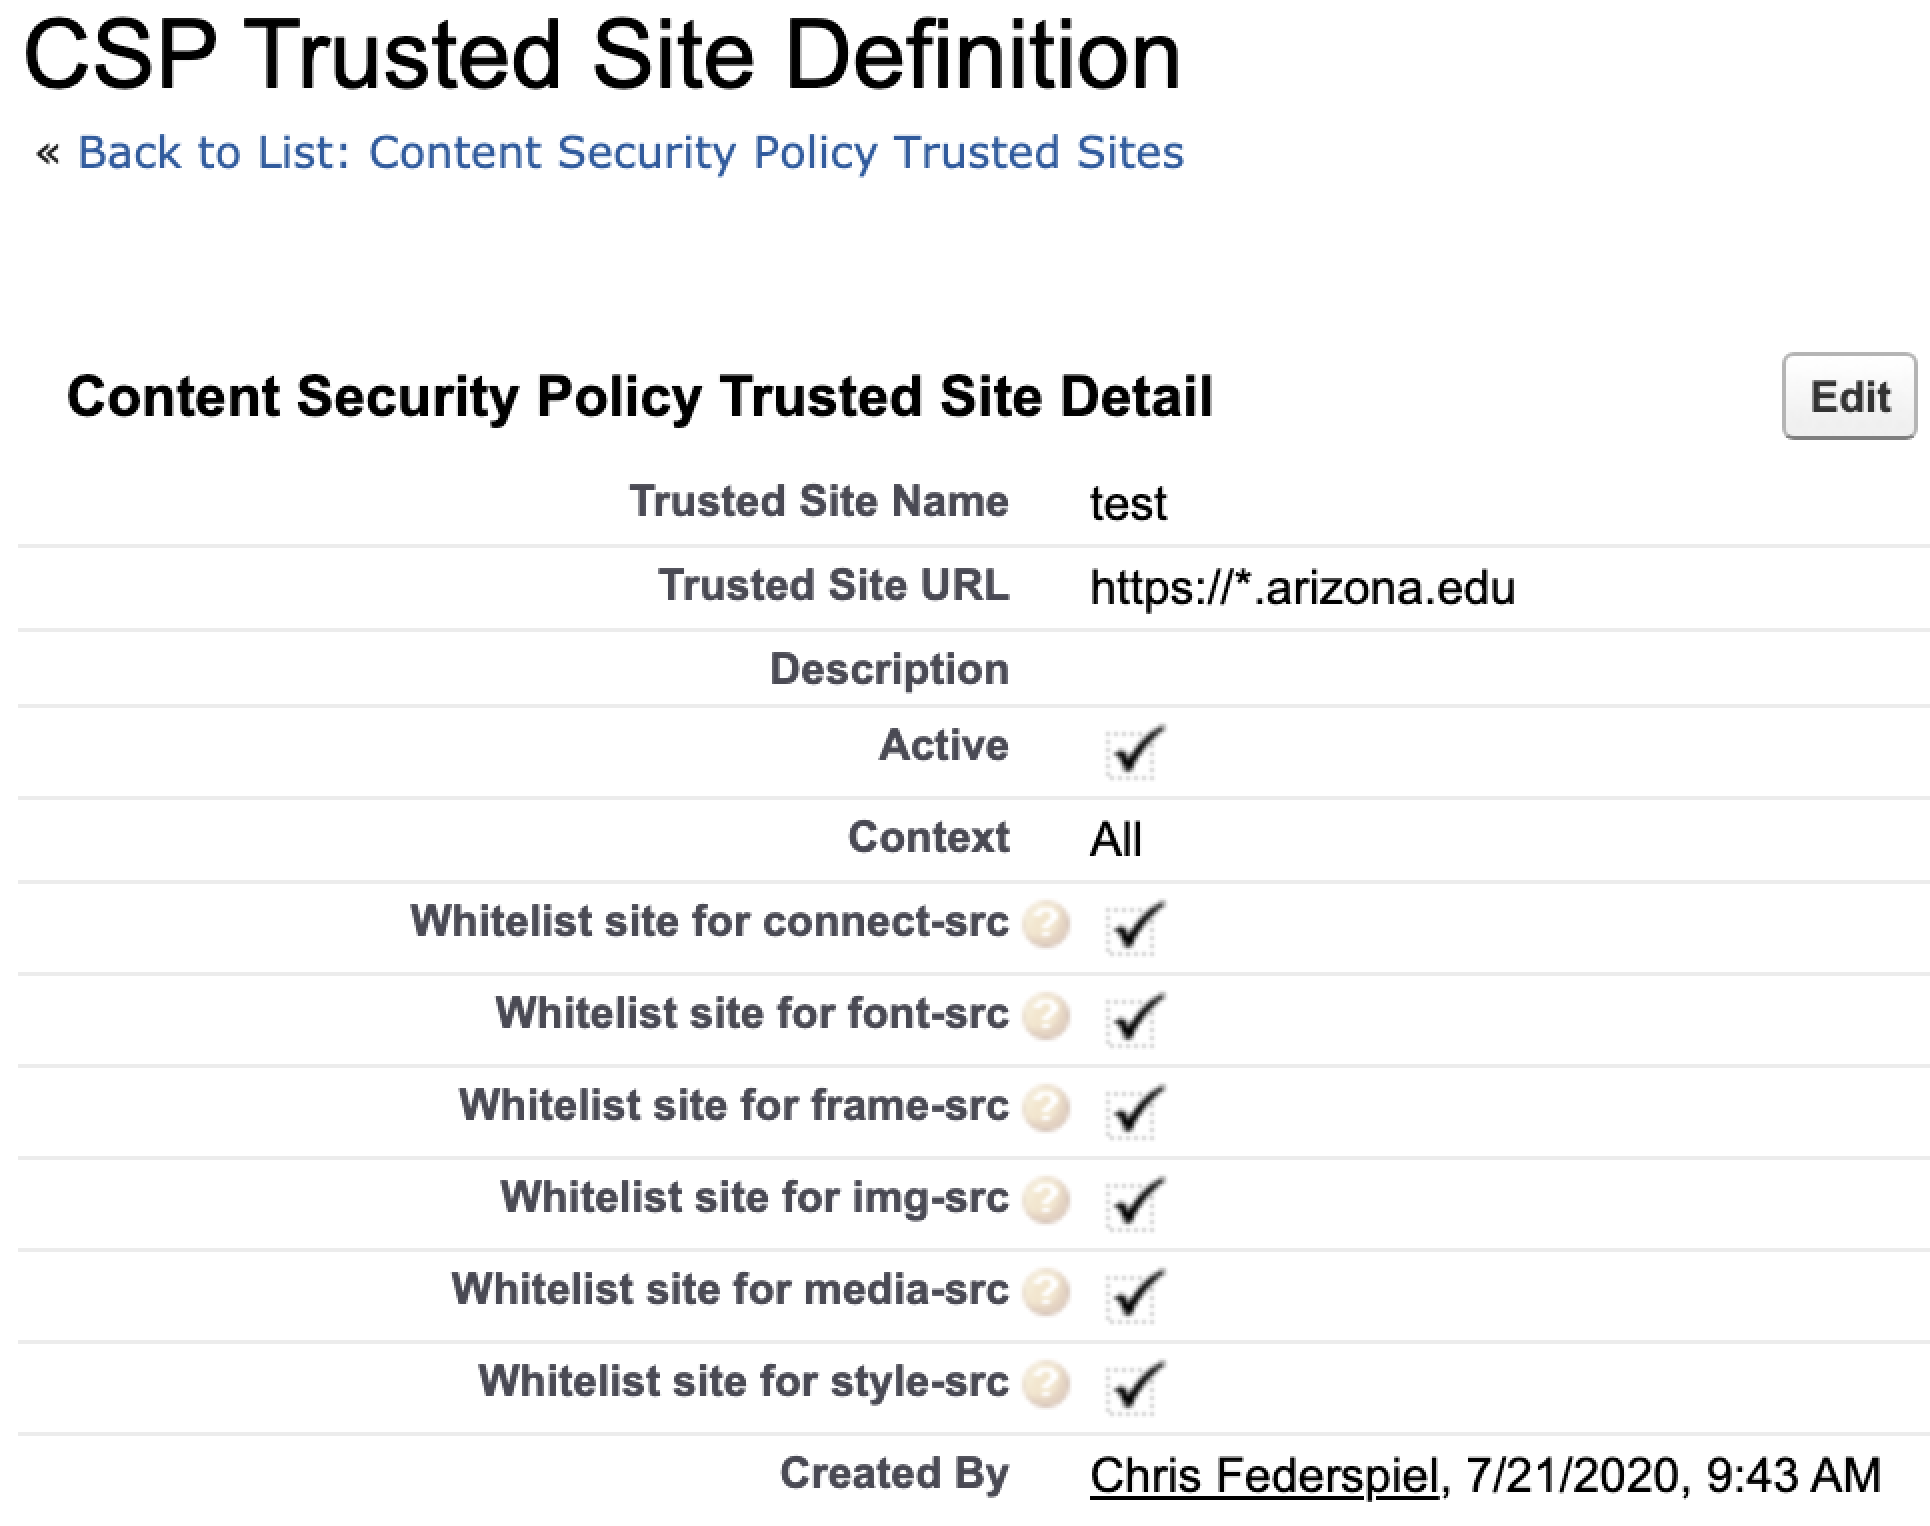 Here is an example of how to set up a trusted site.